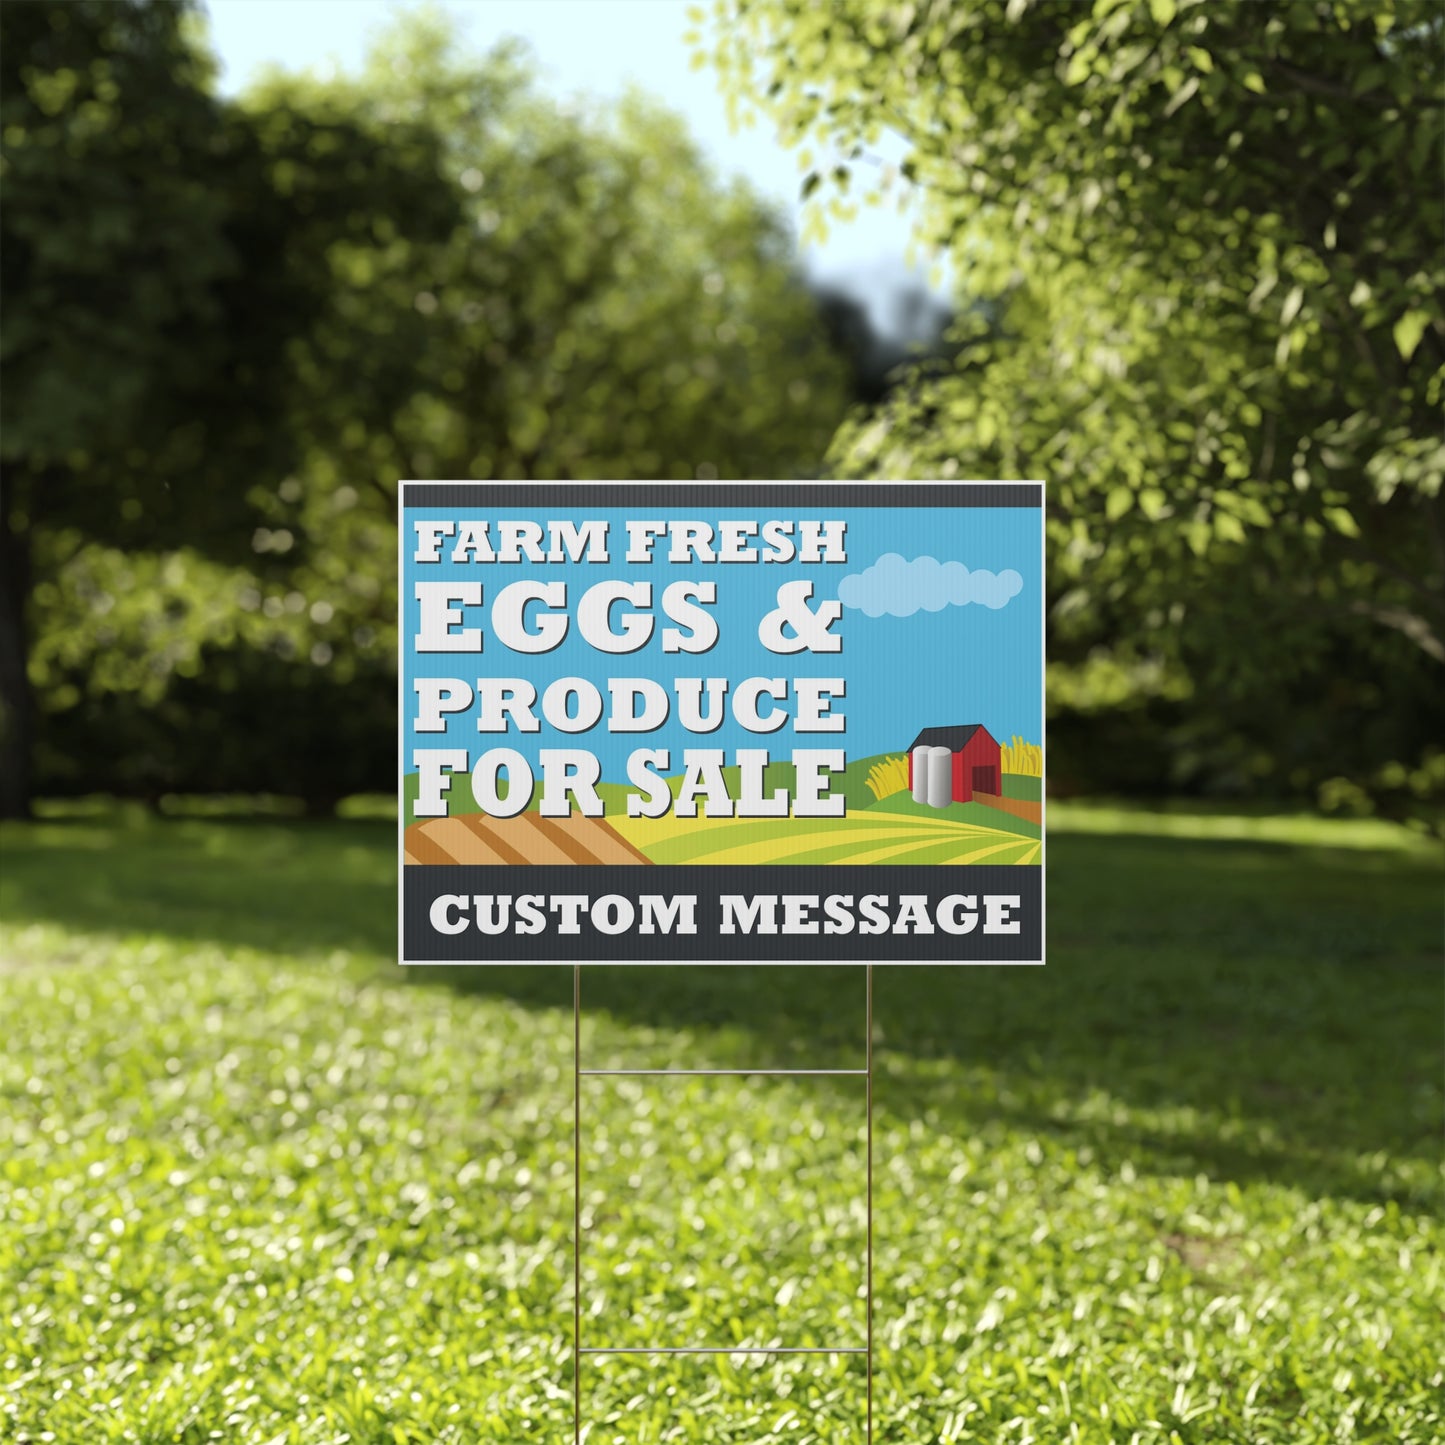 Farm Fresh Eggs And Produce For Sale Yard Sign, Custom, Personalize, 18 x 24-inch, Metal H-Stake Included